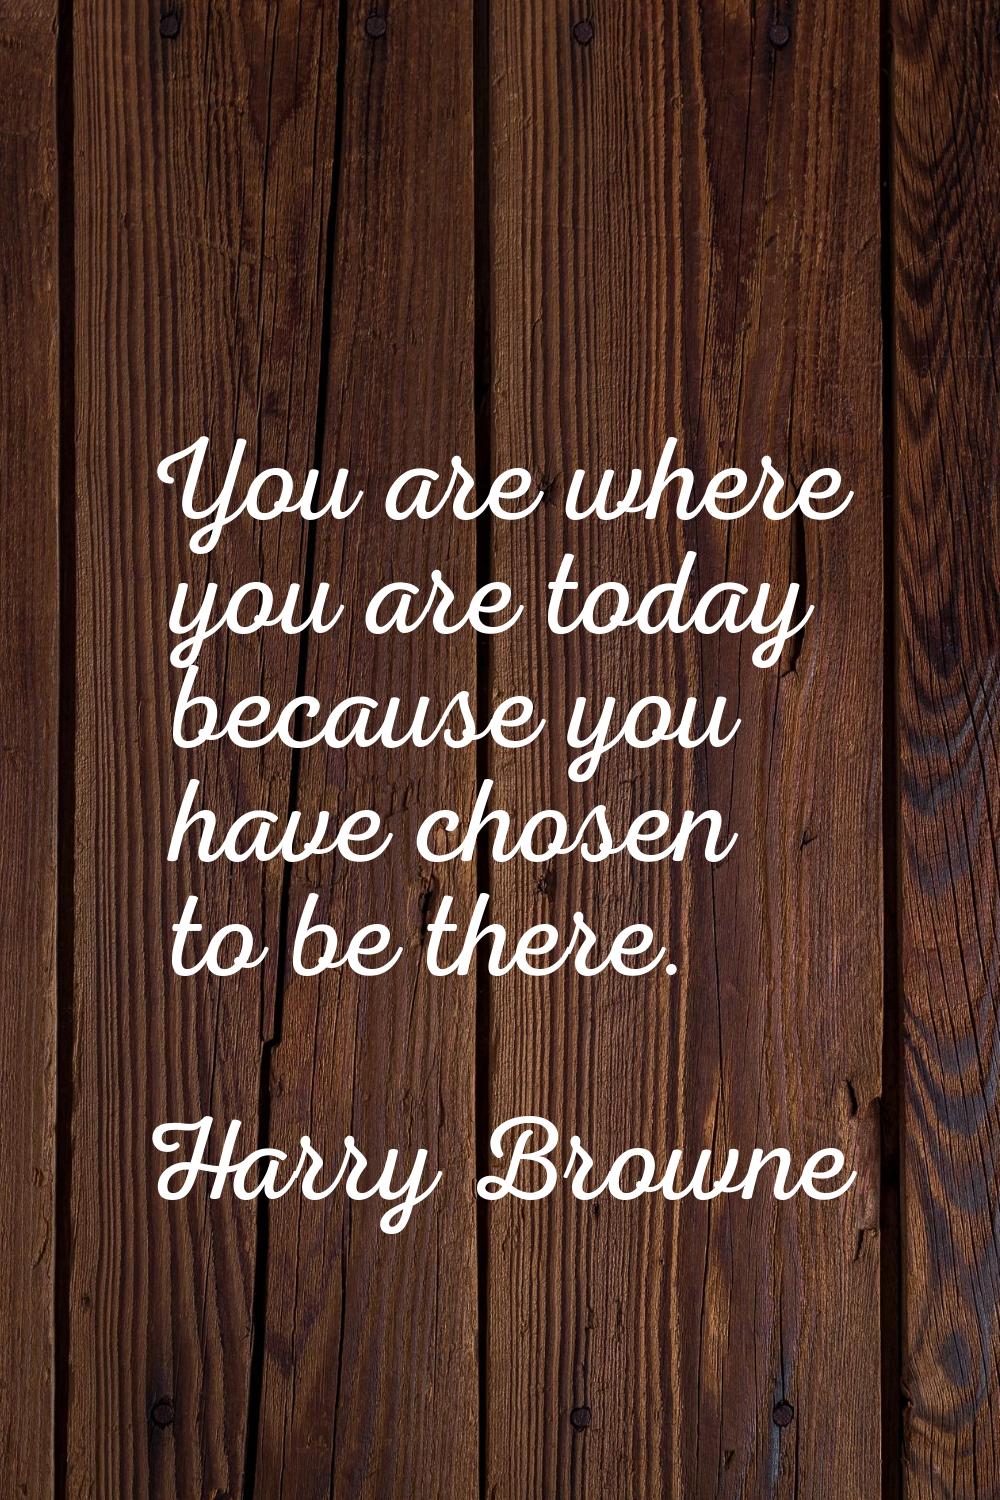 You are where you are today because you have chosen to be there.